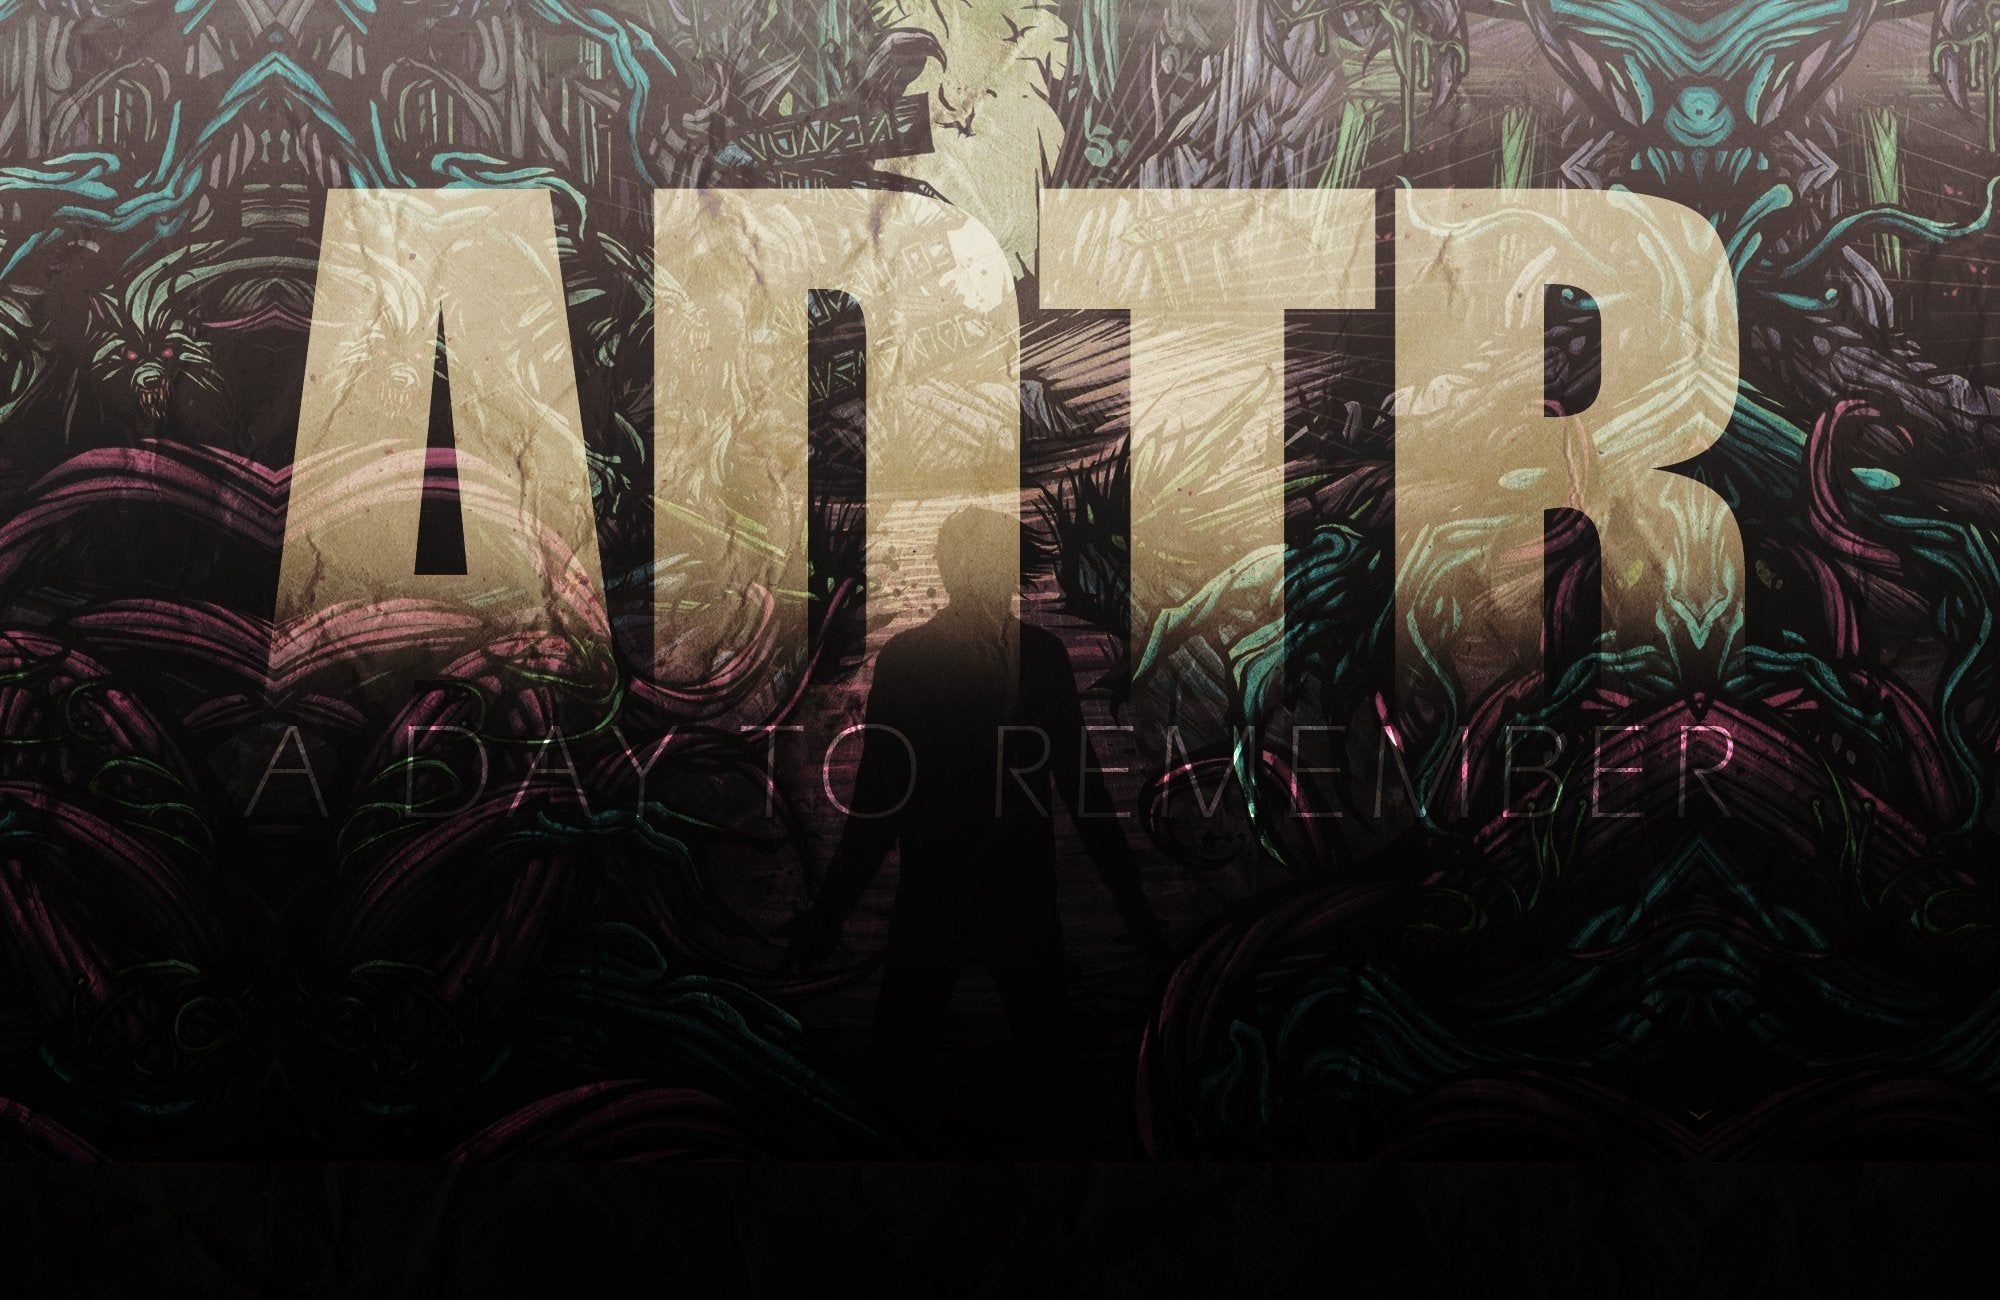 A Day To Remember Wallpapers - Top Free A Day To Remember Backgrounds 2000x1300